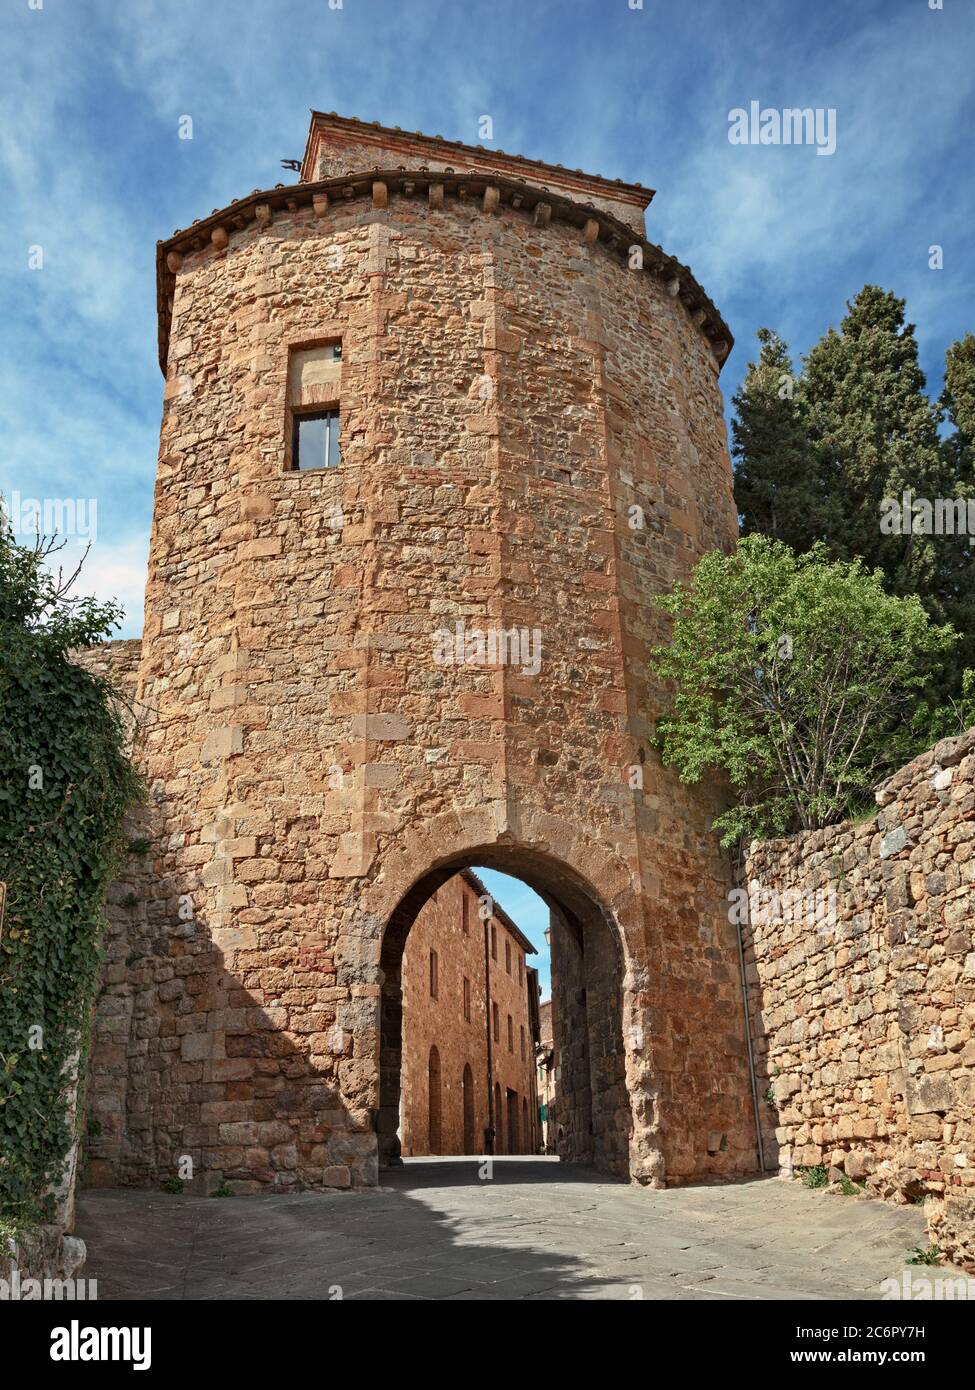 San Quirico d'Orcia, Siena, Tuscany, Italy: the medieval city gate Porta dei Cappuccini at the entrance to the ancient town Stock Photo